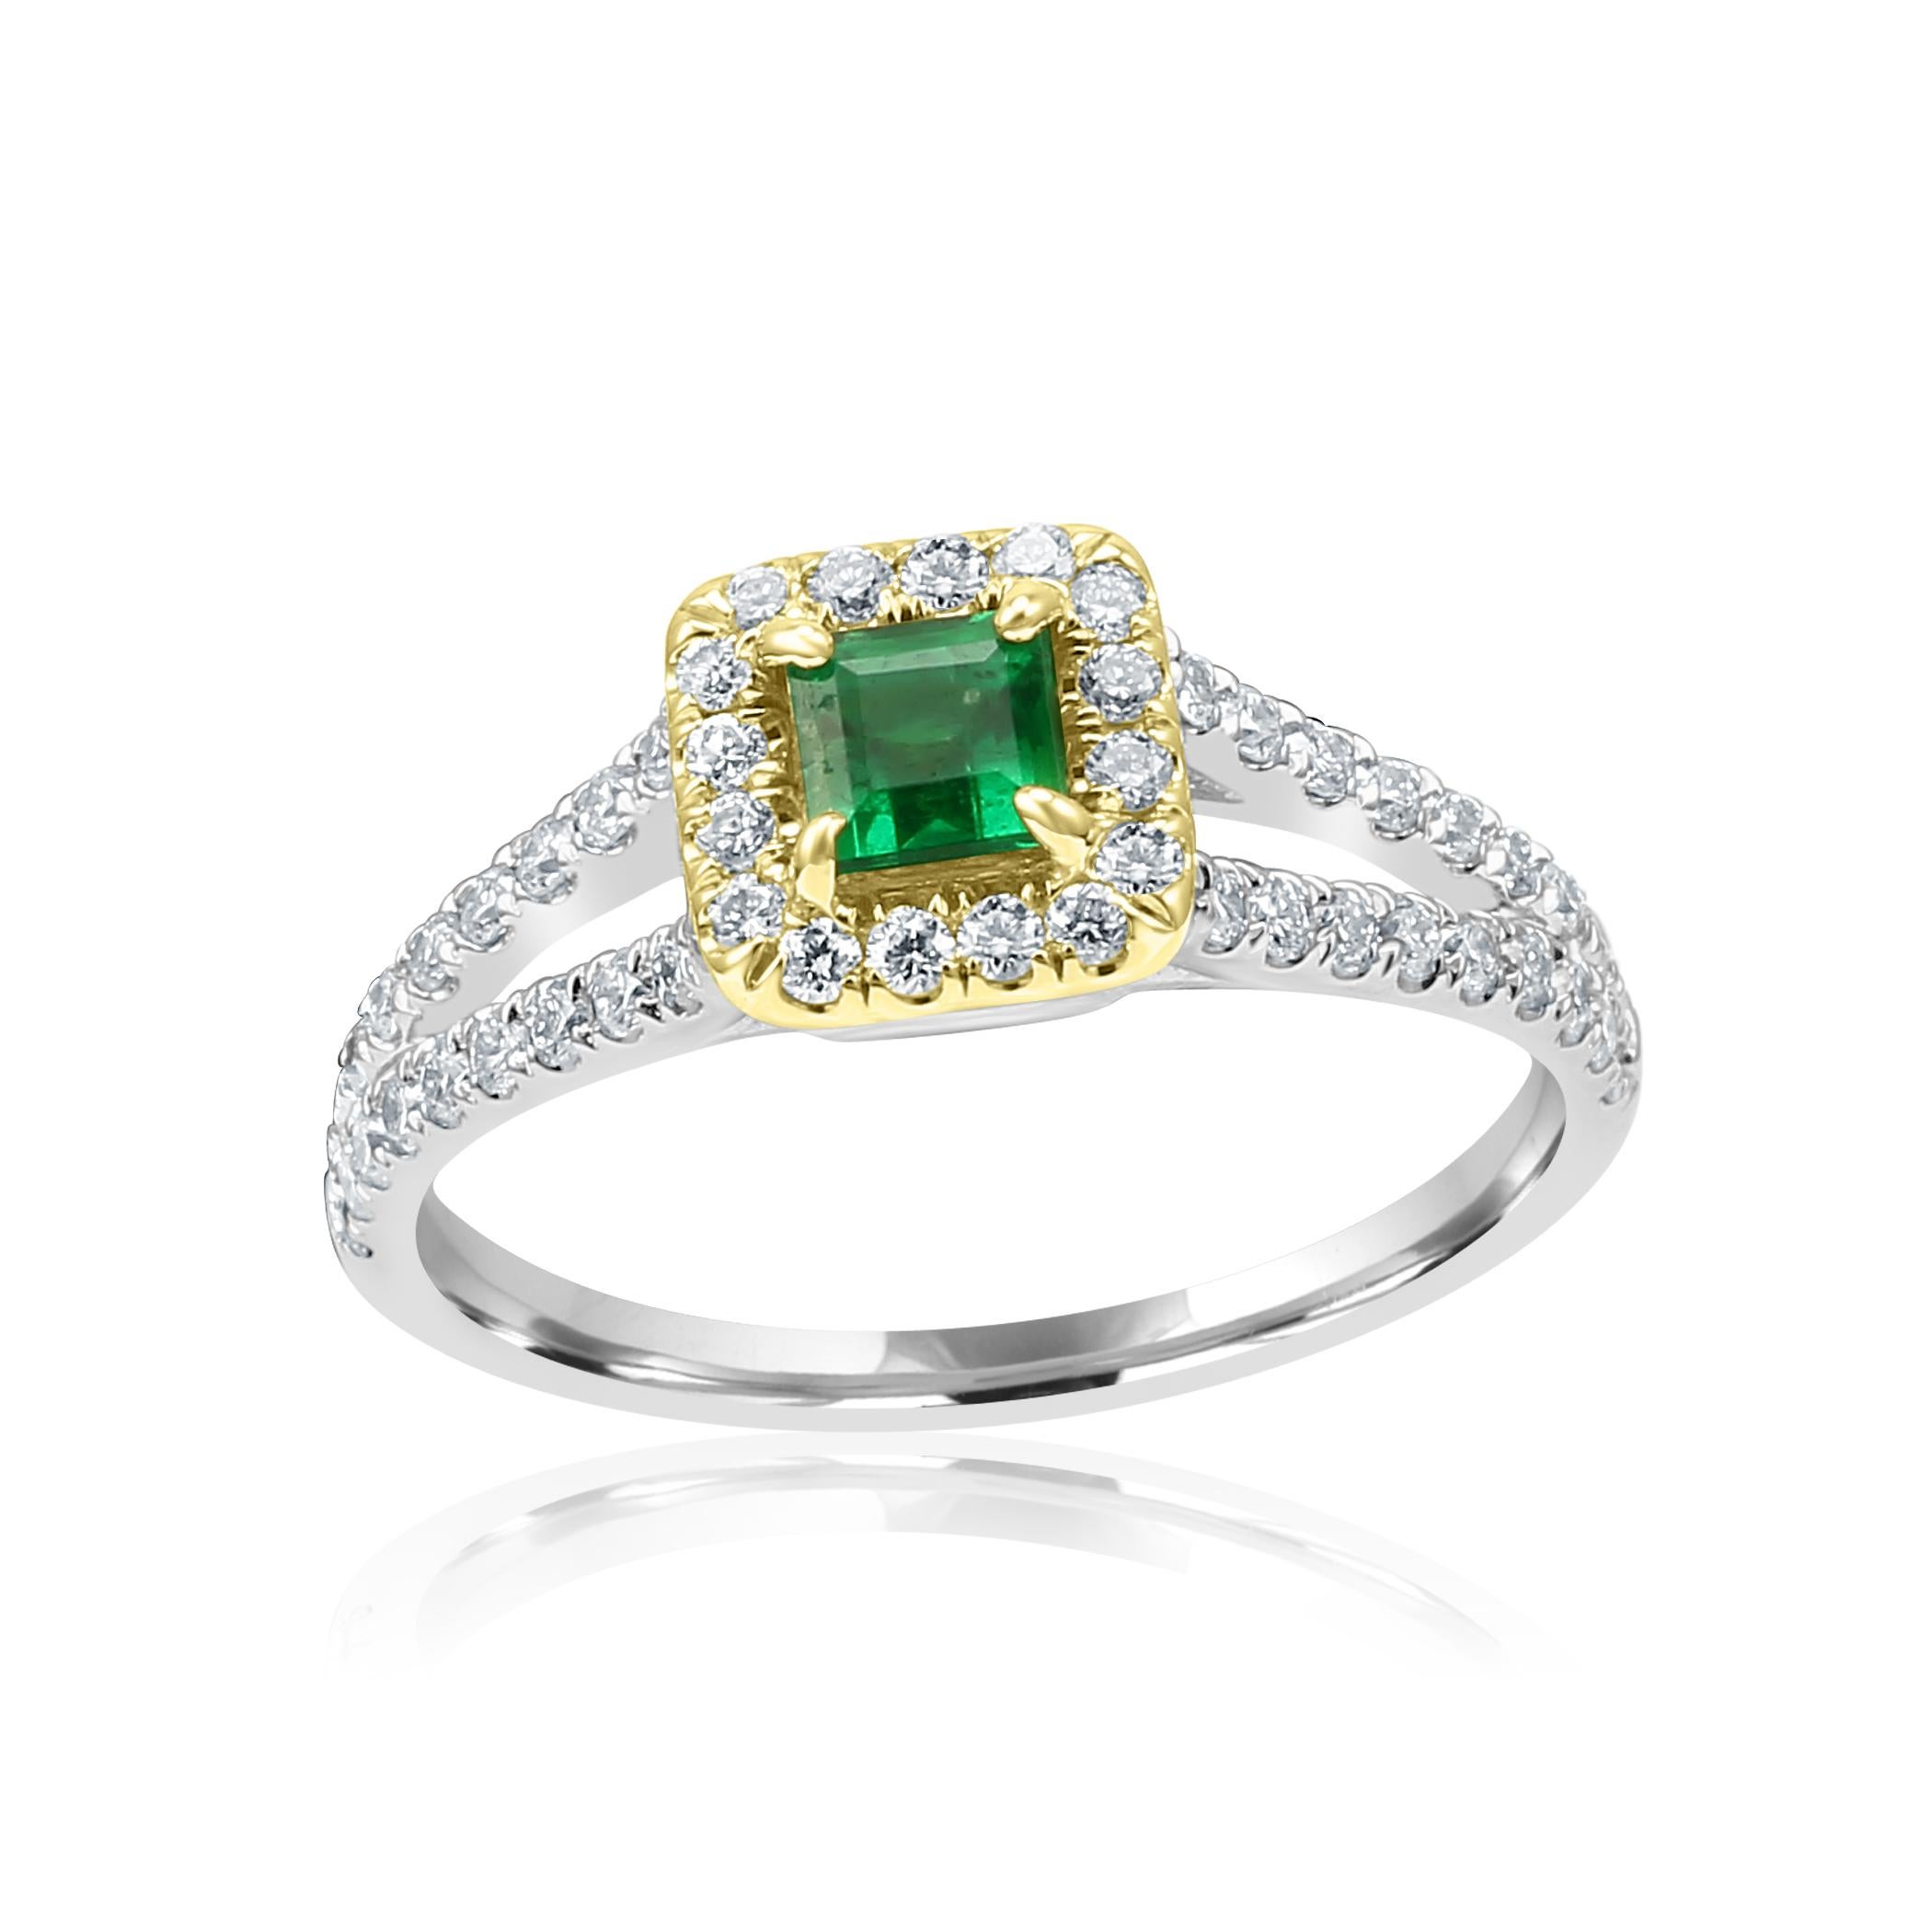 1 Emerald Square Emerald Cut 0.34 Carat encircled in White G-H Color VS-SI Clarity Diamond Round 0.50 Carat Set in Classic Single Halo Bridal Fashion Ring.

MADE IN USA

Style available in different price ranges and with different center stones, can